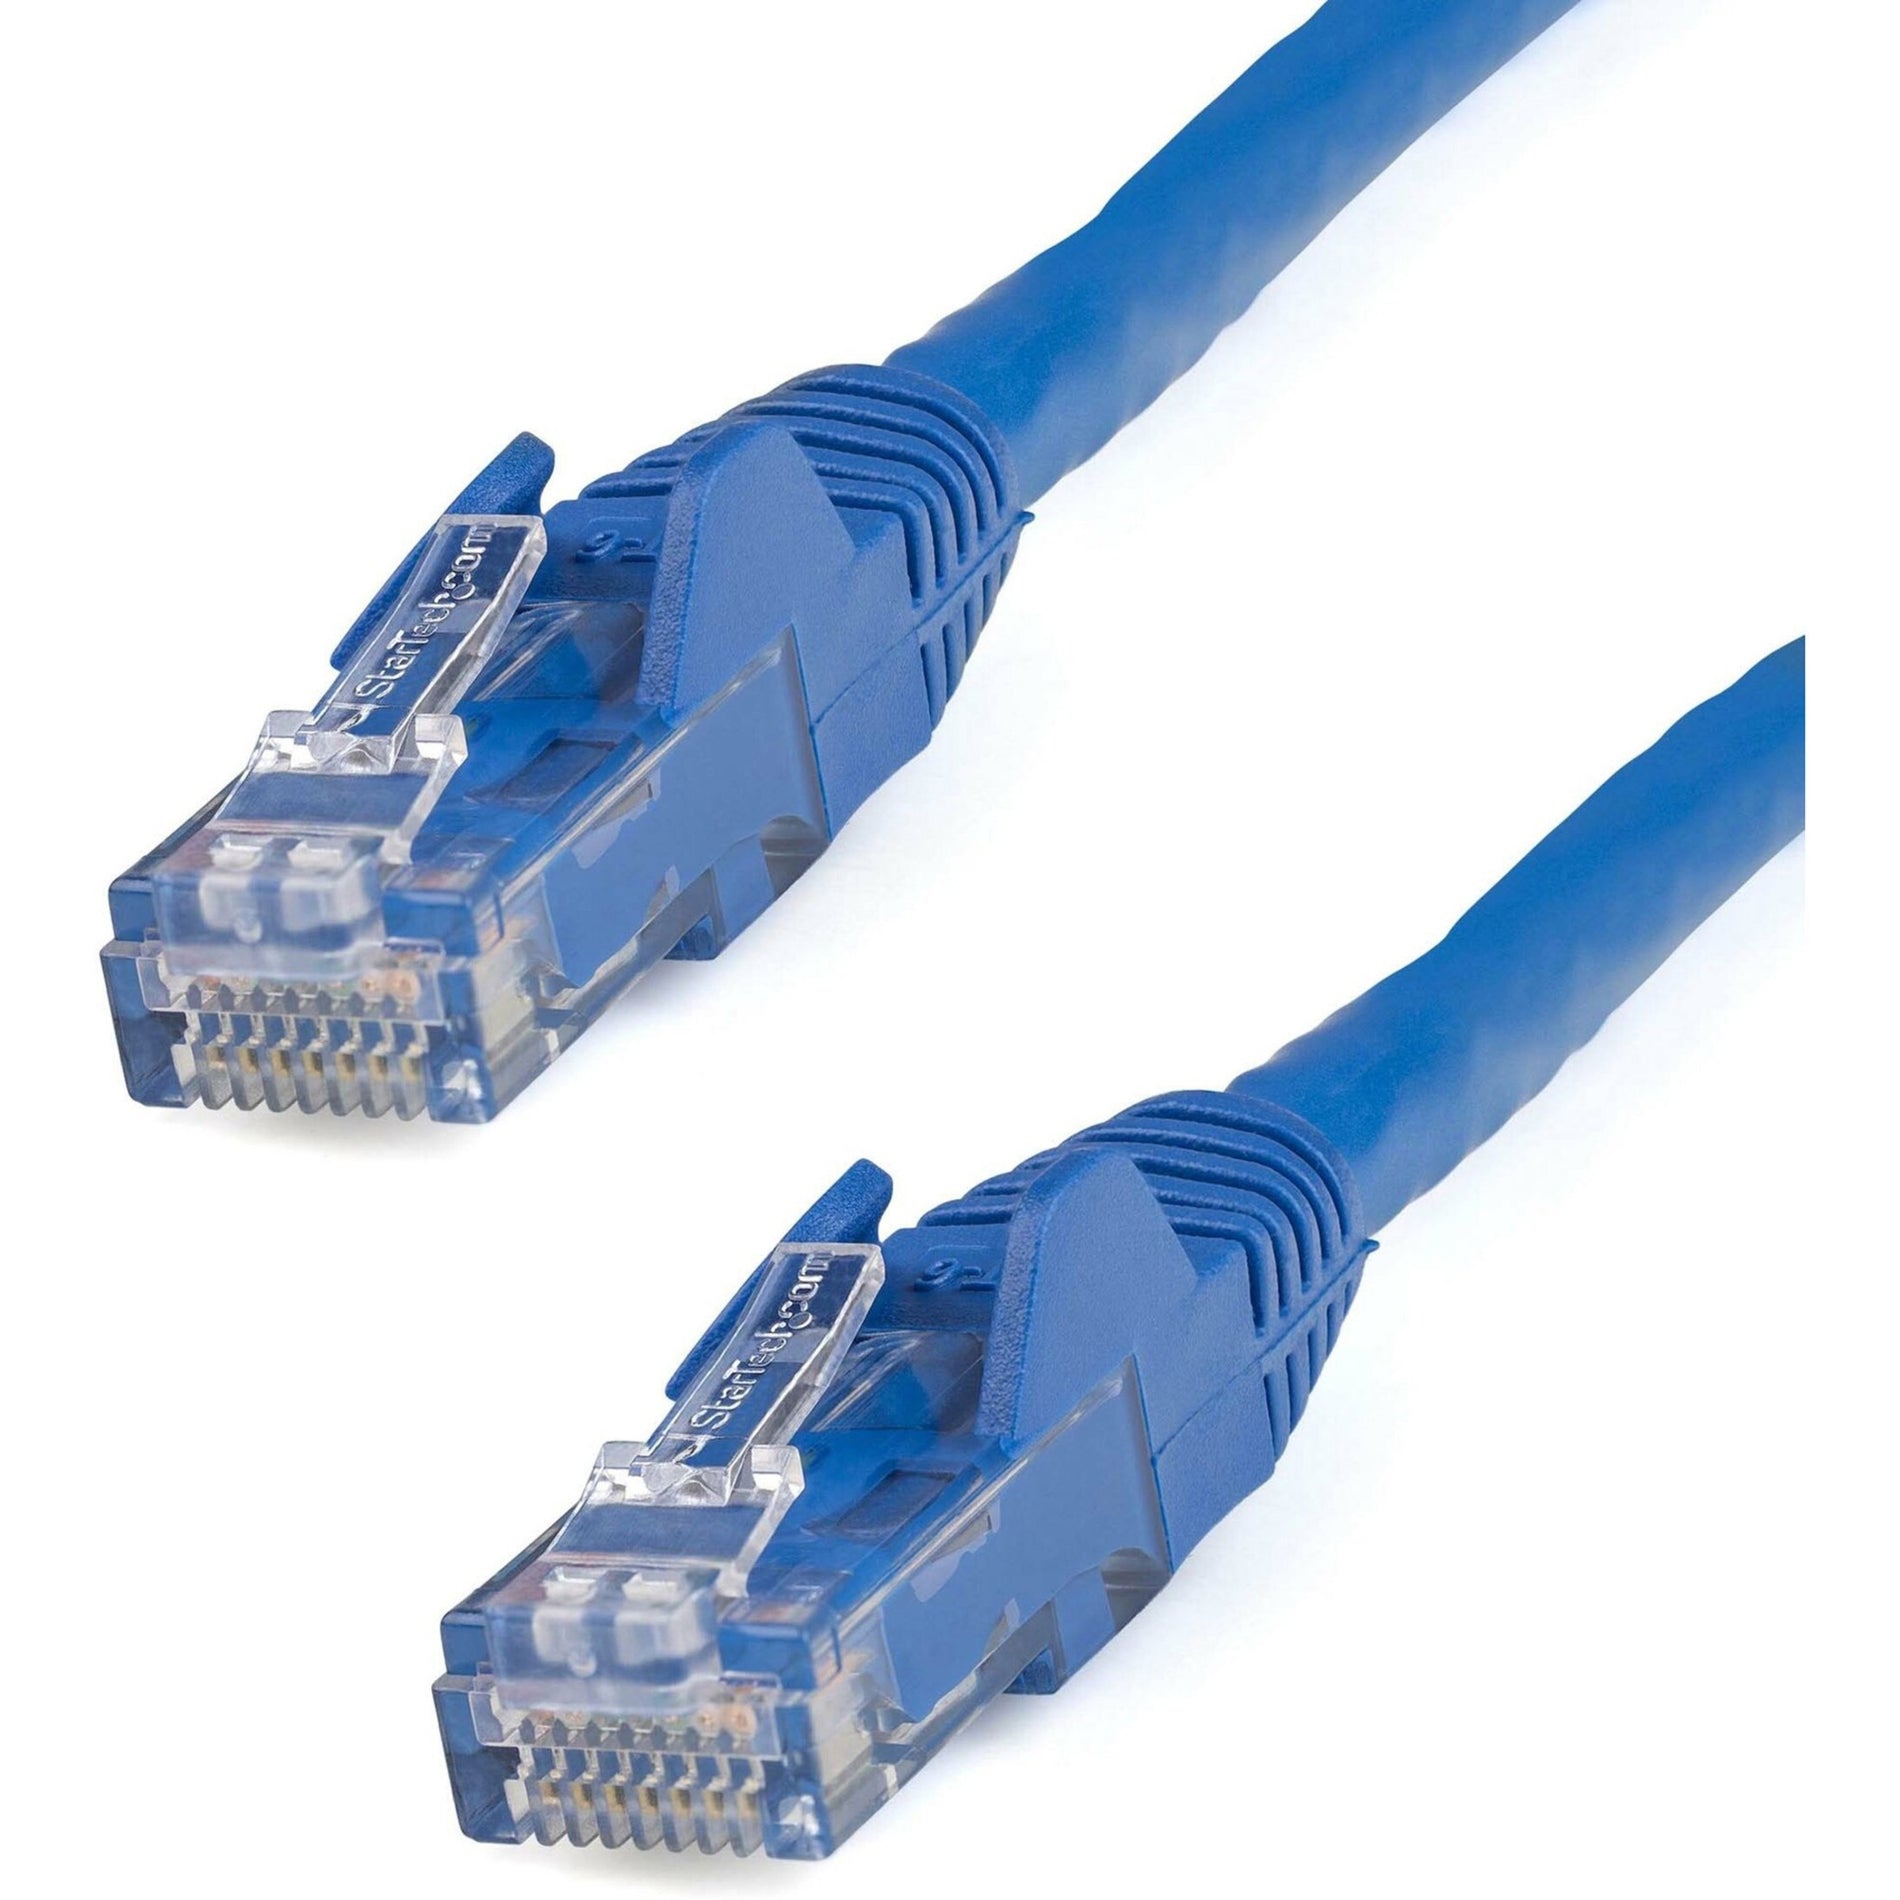 StarTech.com N6PATCH50BL Cat. 6 Patch Cable, 50 ft Blue Snagless, Stranded, Flexible, 10 Gbit/s